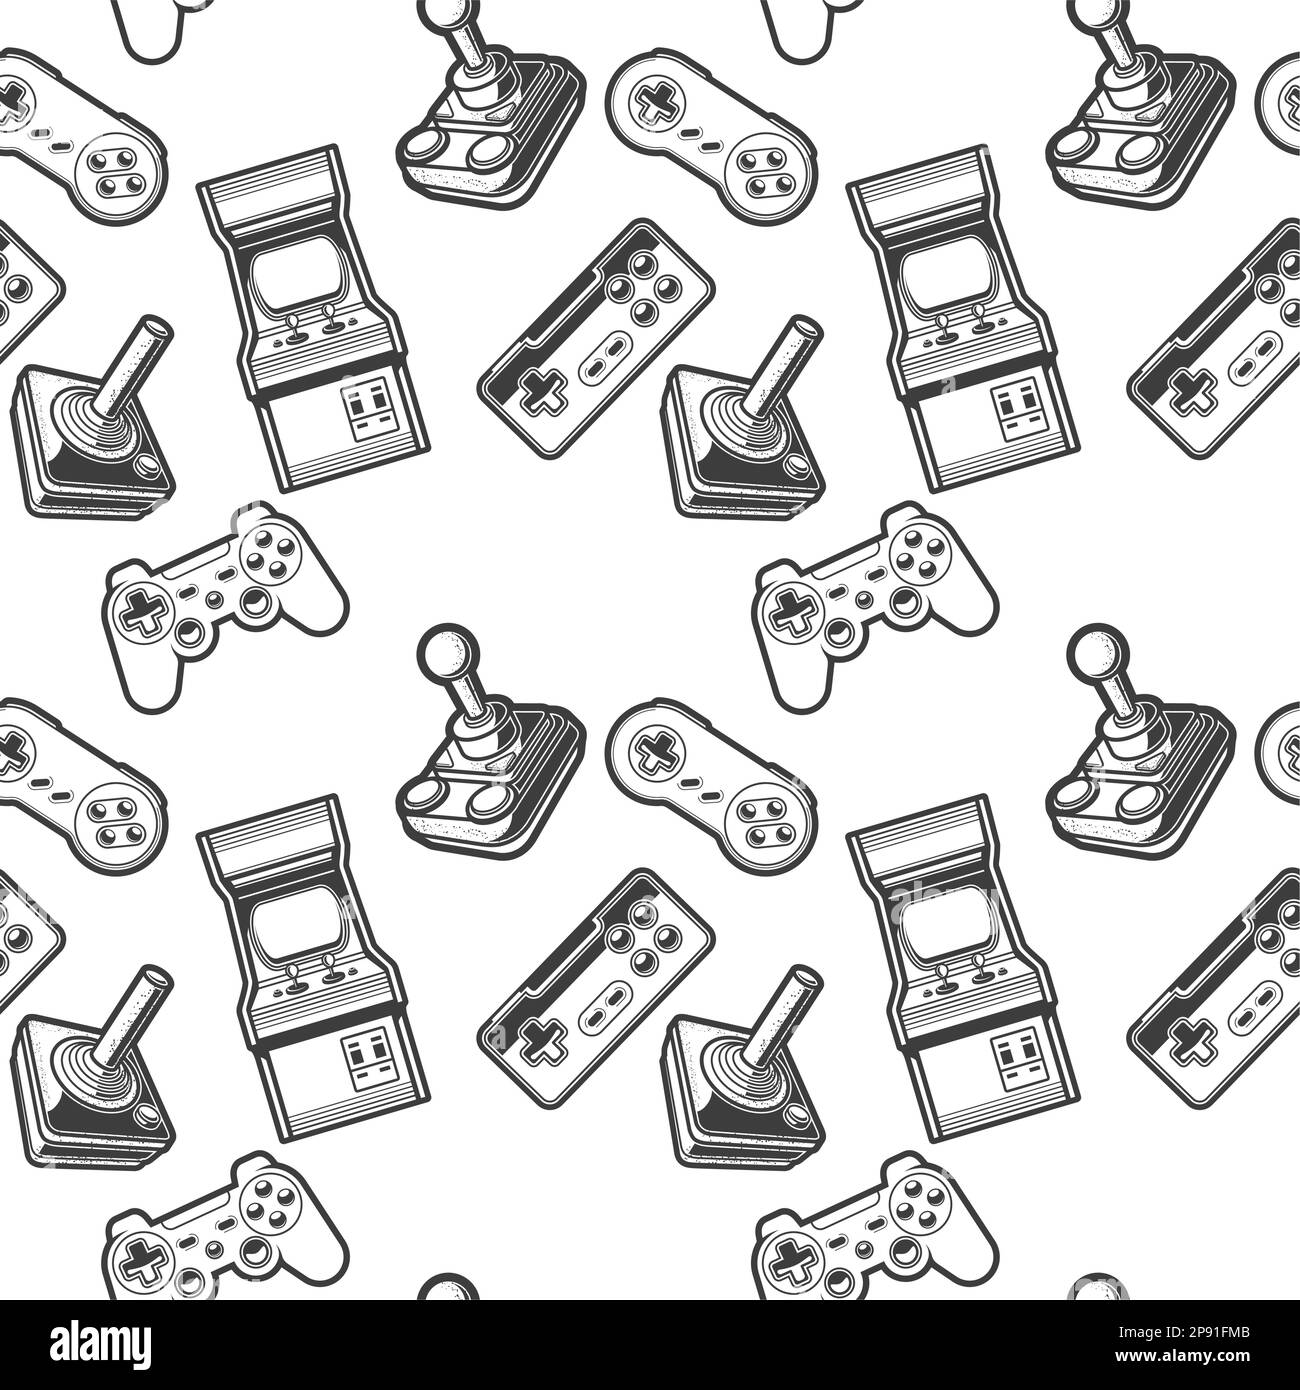 Seamless retro background with arcade game machine, old joysticks and game controllers, vintage gamepad, vector Stock Vector